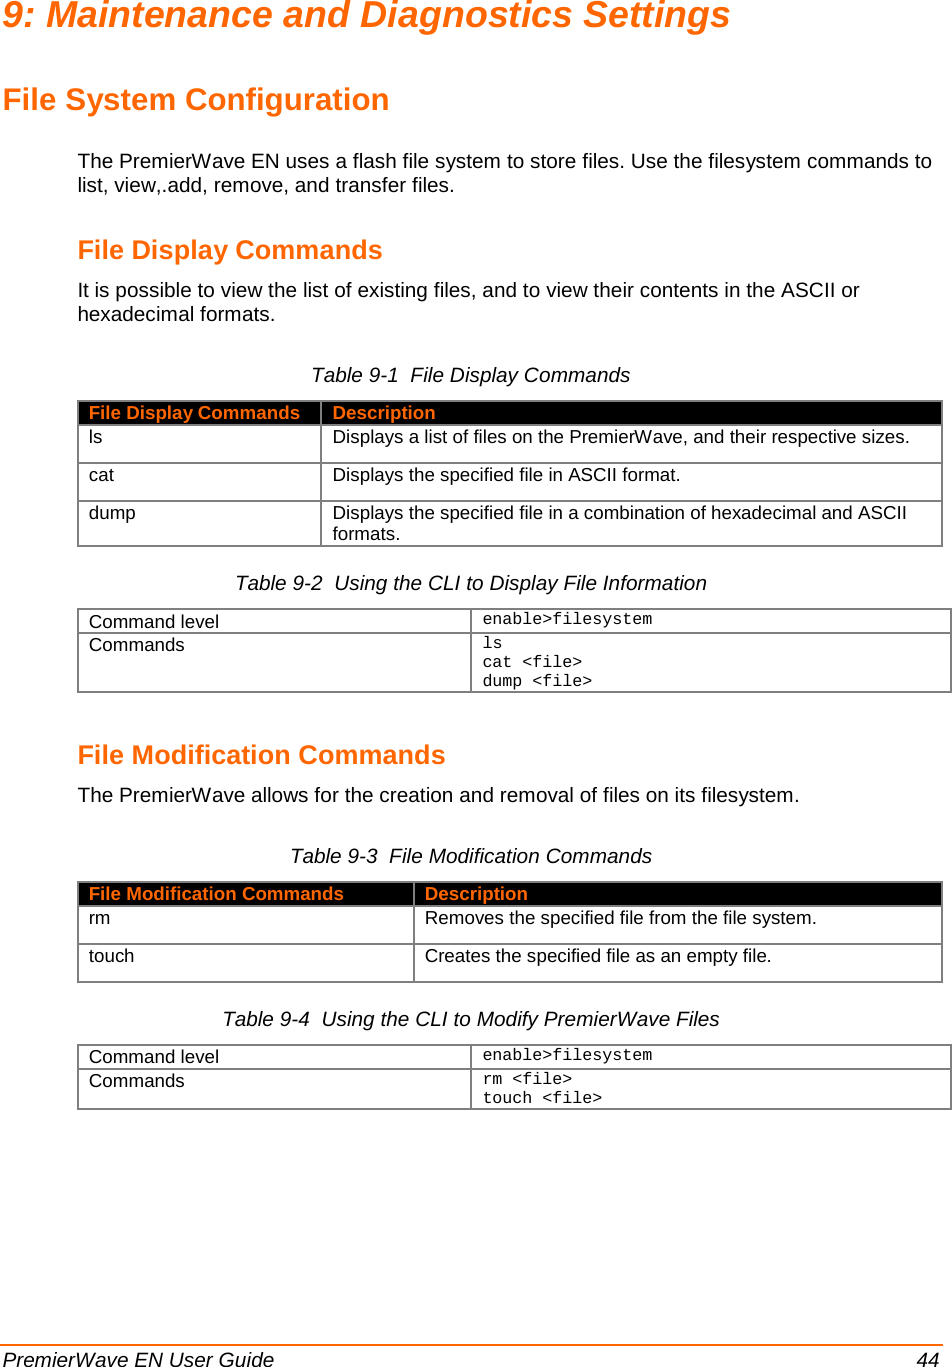  PremierWave EN User Guide    44 9: Maintenance and Diagnostics Settings File System Configuration The PremierWave EN uses a flash file system to store files. Use the filesystem commands to list, view,.add, remove, and transfer files. File Display Commands  It is possible to view the list of existing files, and to view their contents in the ASCII or hexadecimal formats. Table 9-1  File Display Commands File Display Commands Description ls Displays a list of files on the PremierWave, and their respective sizes. cat Displays the specified file in ASCII format. dump Displays the specified file in a combination of hexadecimal and ASCII formats. Table 9-2  Using the CLI to Display File Information Command level enable&gt;filesystem Commands ls cat &lt;file&gt; dump &lt;file&gt;    File Modification Commands The PremierWave allows for the creation and removal of files on its filesystem. Table 9-3  File Modification Commands File Modification Commands Description rm Removes the specified file from the file system. touch Creates the specified file as an empty file. Table 9-4  Using the CLI to Modify PremierWave Files Command level enable&gt;filesystem Commands rm &lt;file&gt; touch &lt;file&gt;  